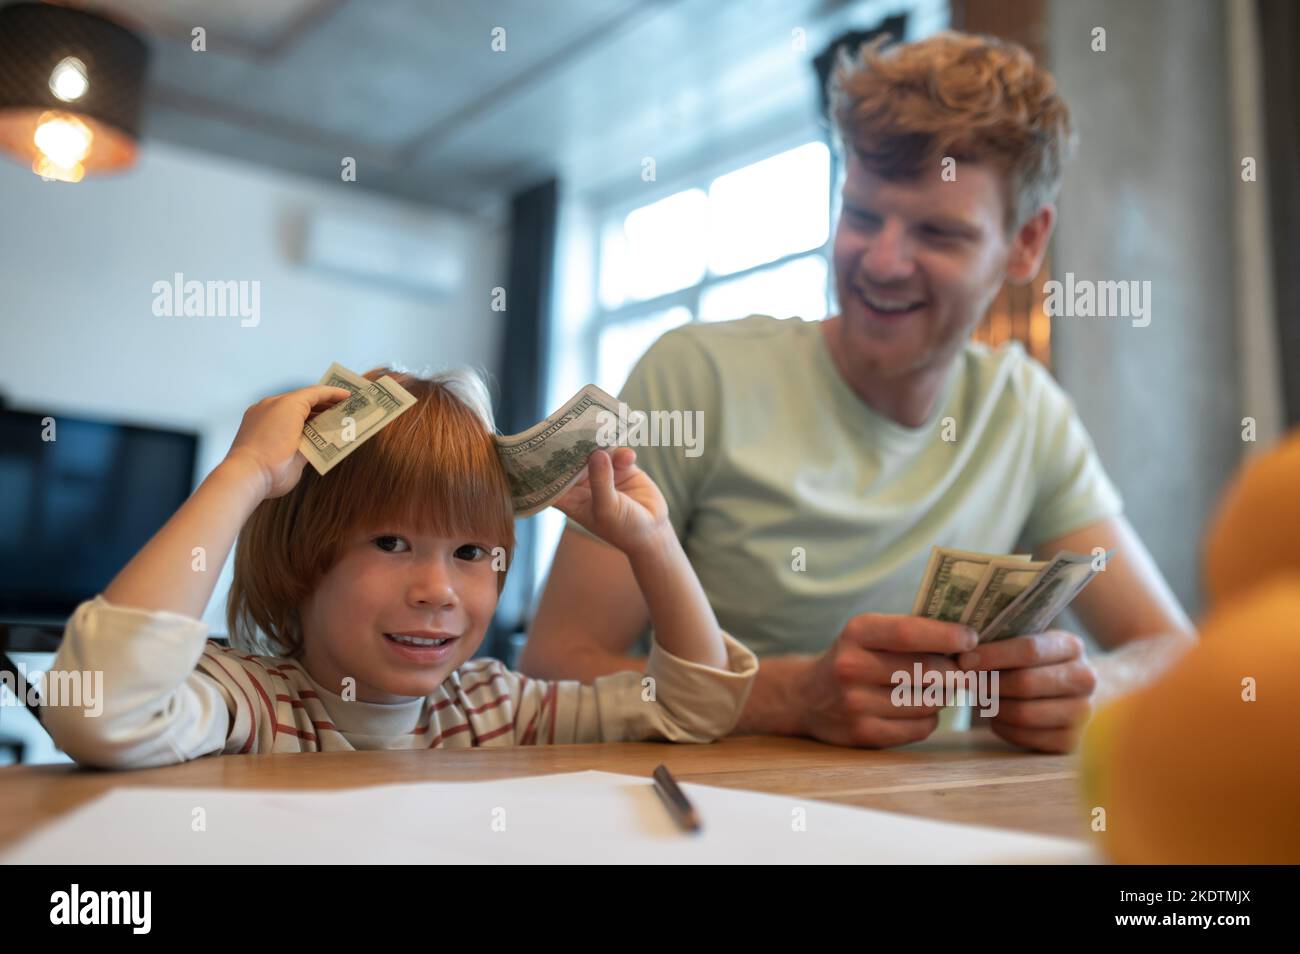 Dad explaining his son the importance of financial literacy Stock Photo